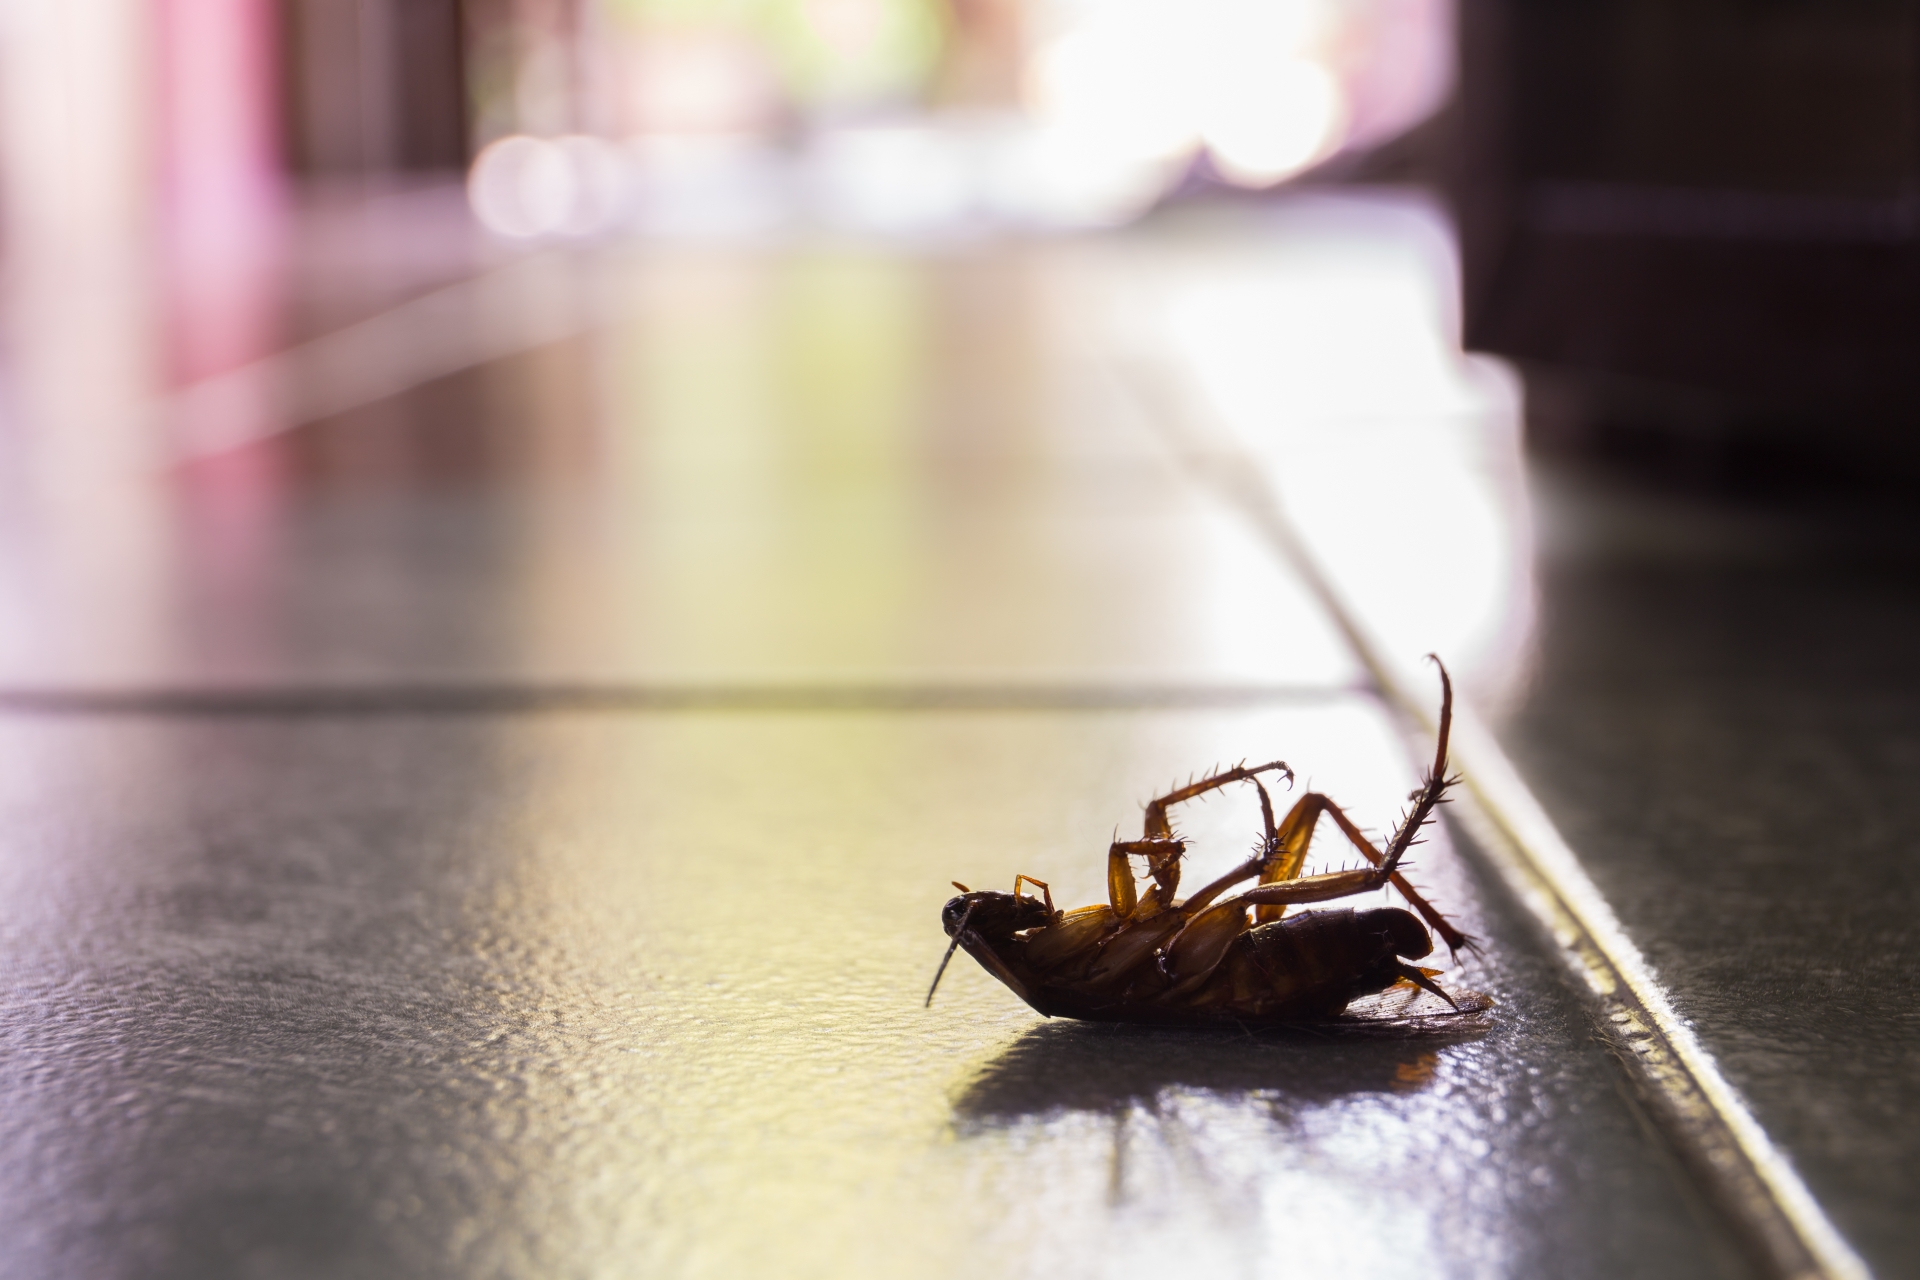 Cockroach Control, Pest Control in Warlingham, Chelsham, CR6. Call Now 020 8166 9746